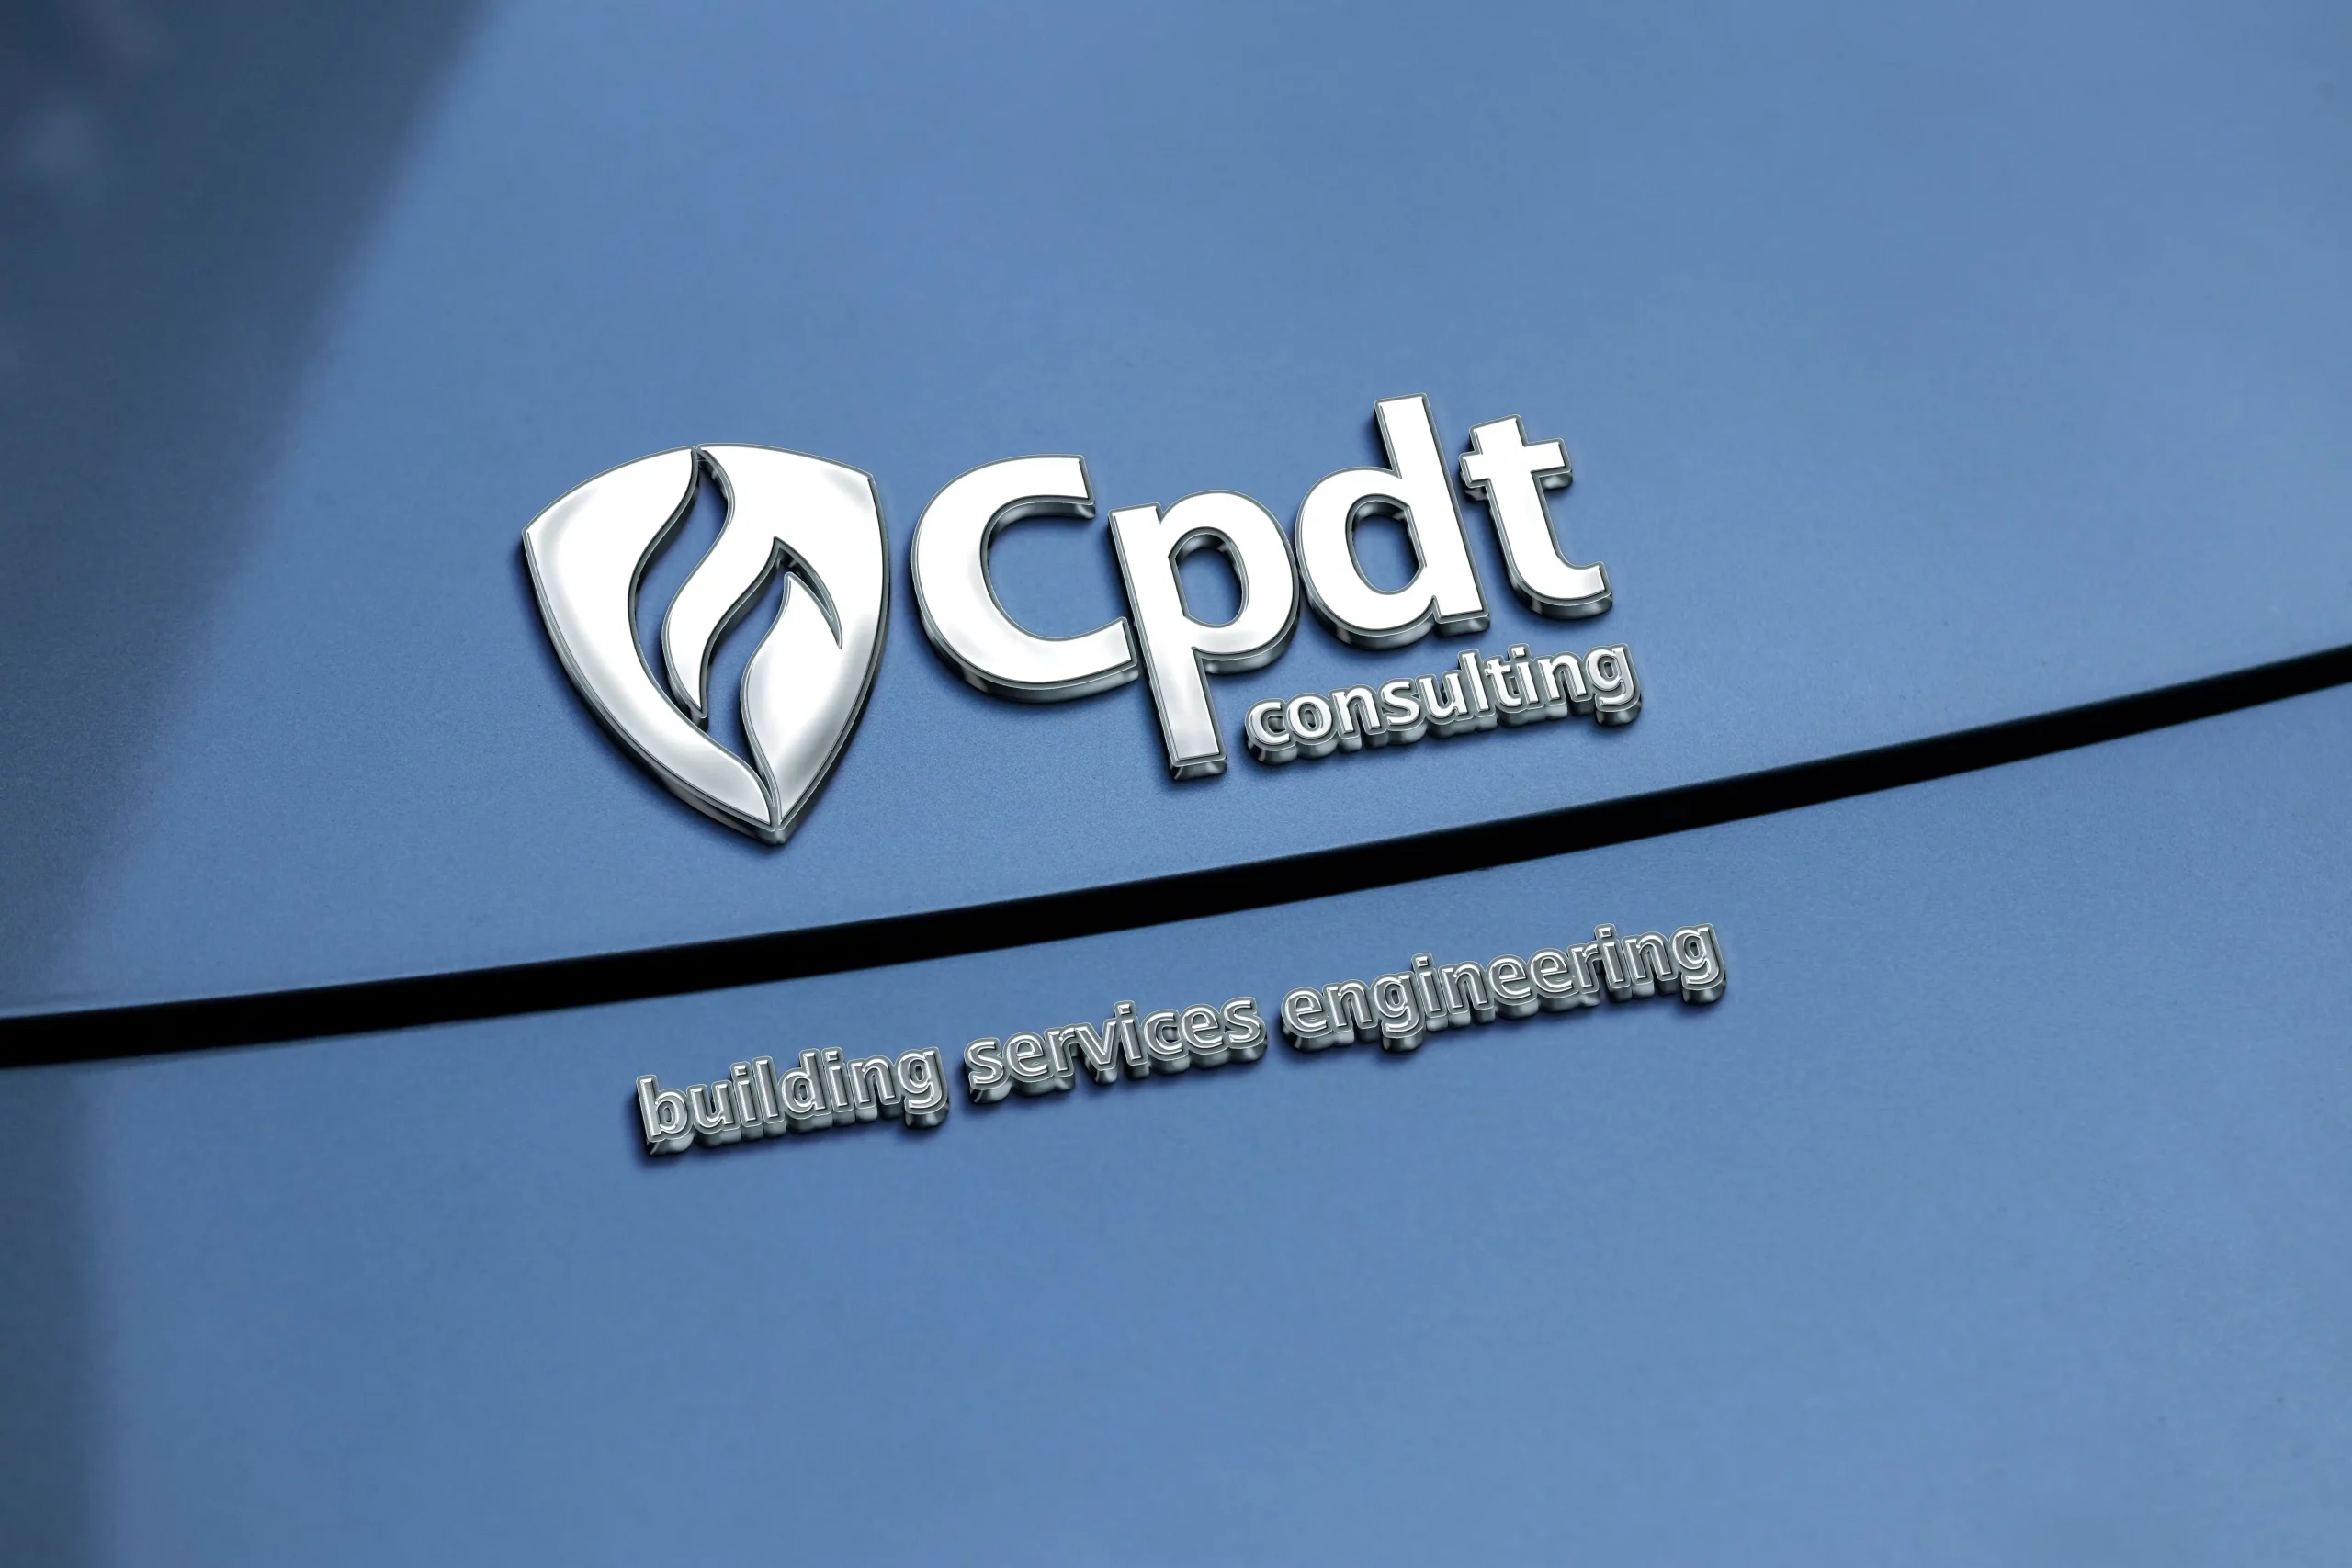 Logo Making made easy for CPDT Consulting in Wellington. A Wellington Corporate Business Logo Design made by XDC.NZ, the best Logo Designer or Logo Maker based in Christchurch & Rolleston Selwyn NZ without the hefty Ad-Agency price tag